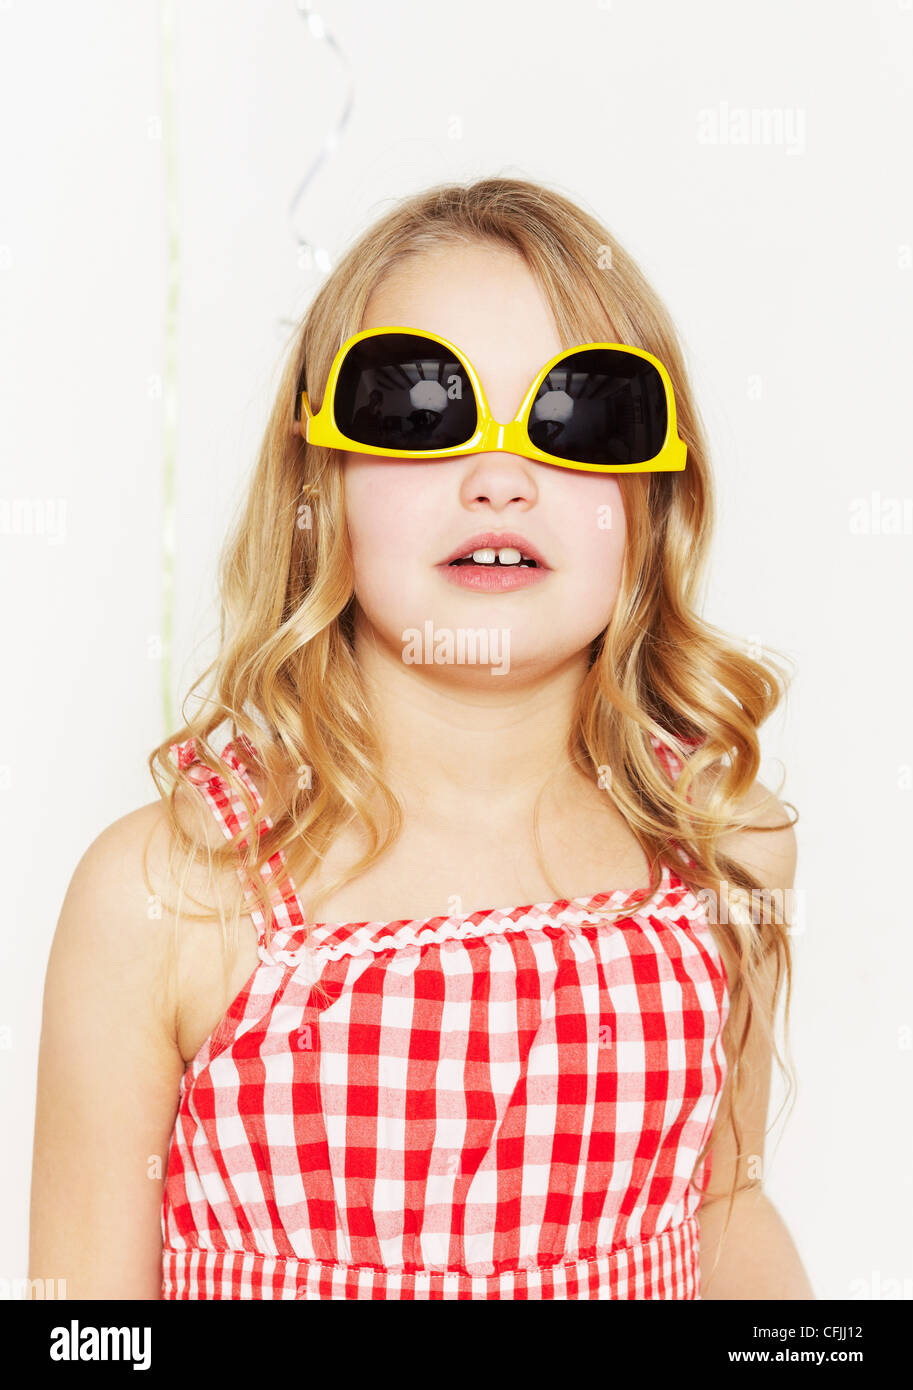 Girl with sunglasses on upside down Stock Photo